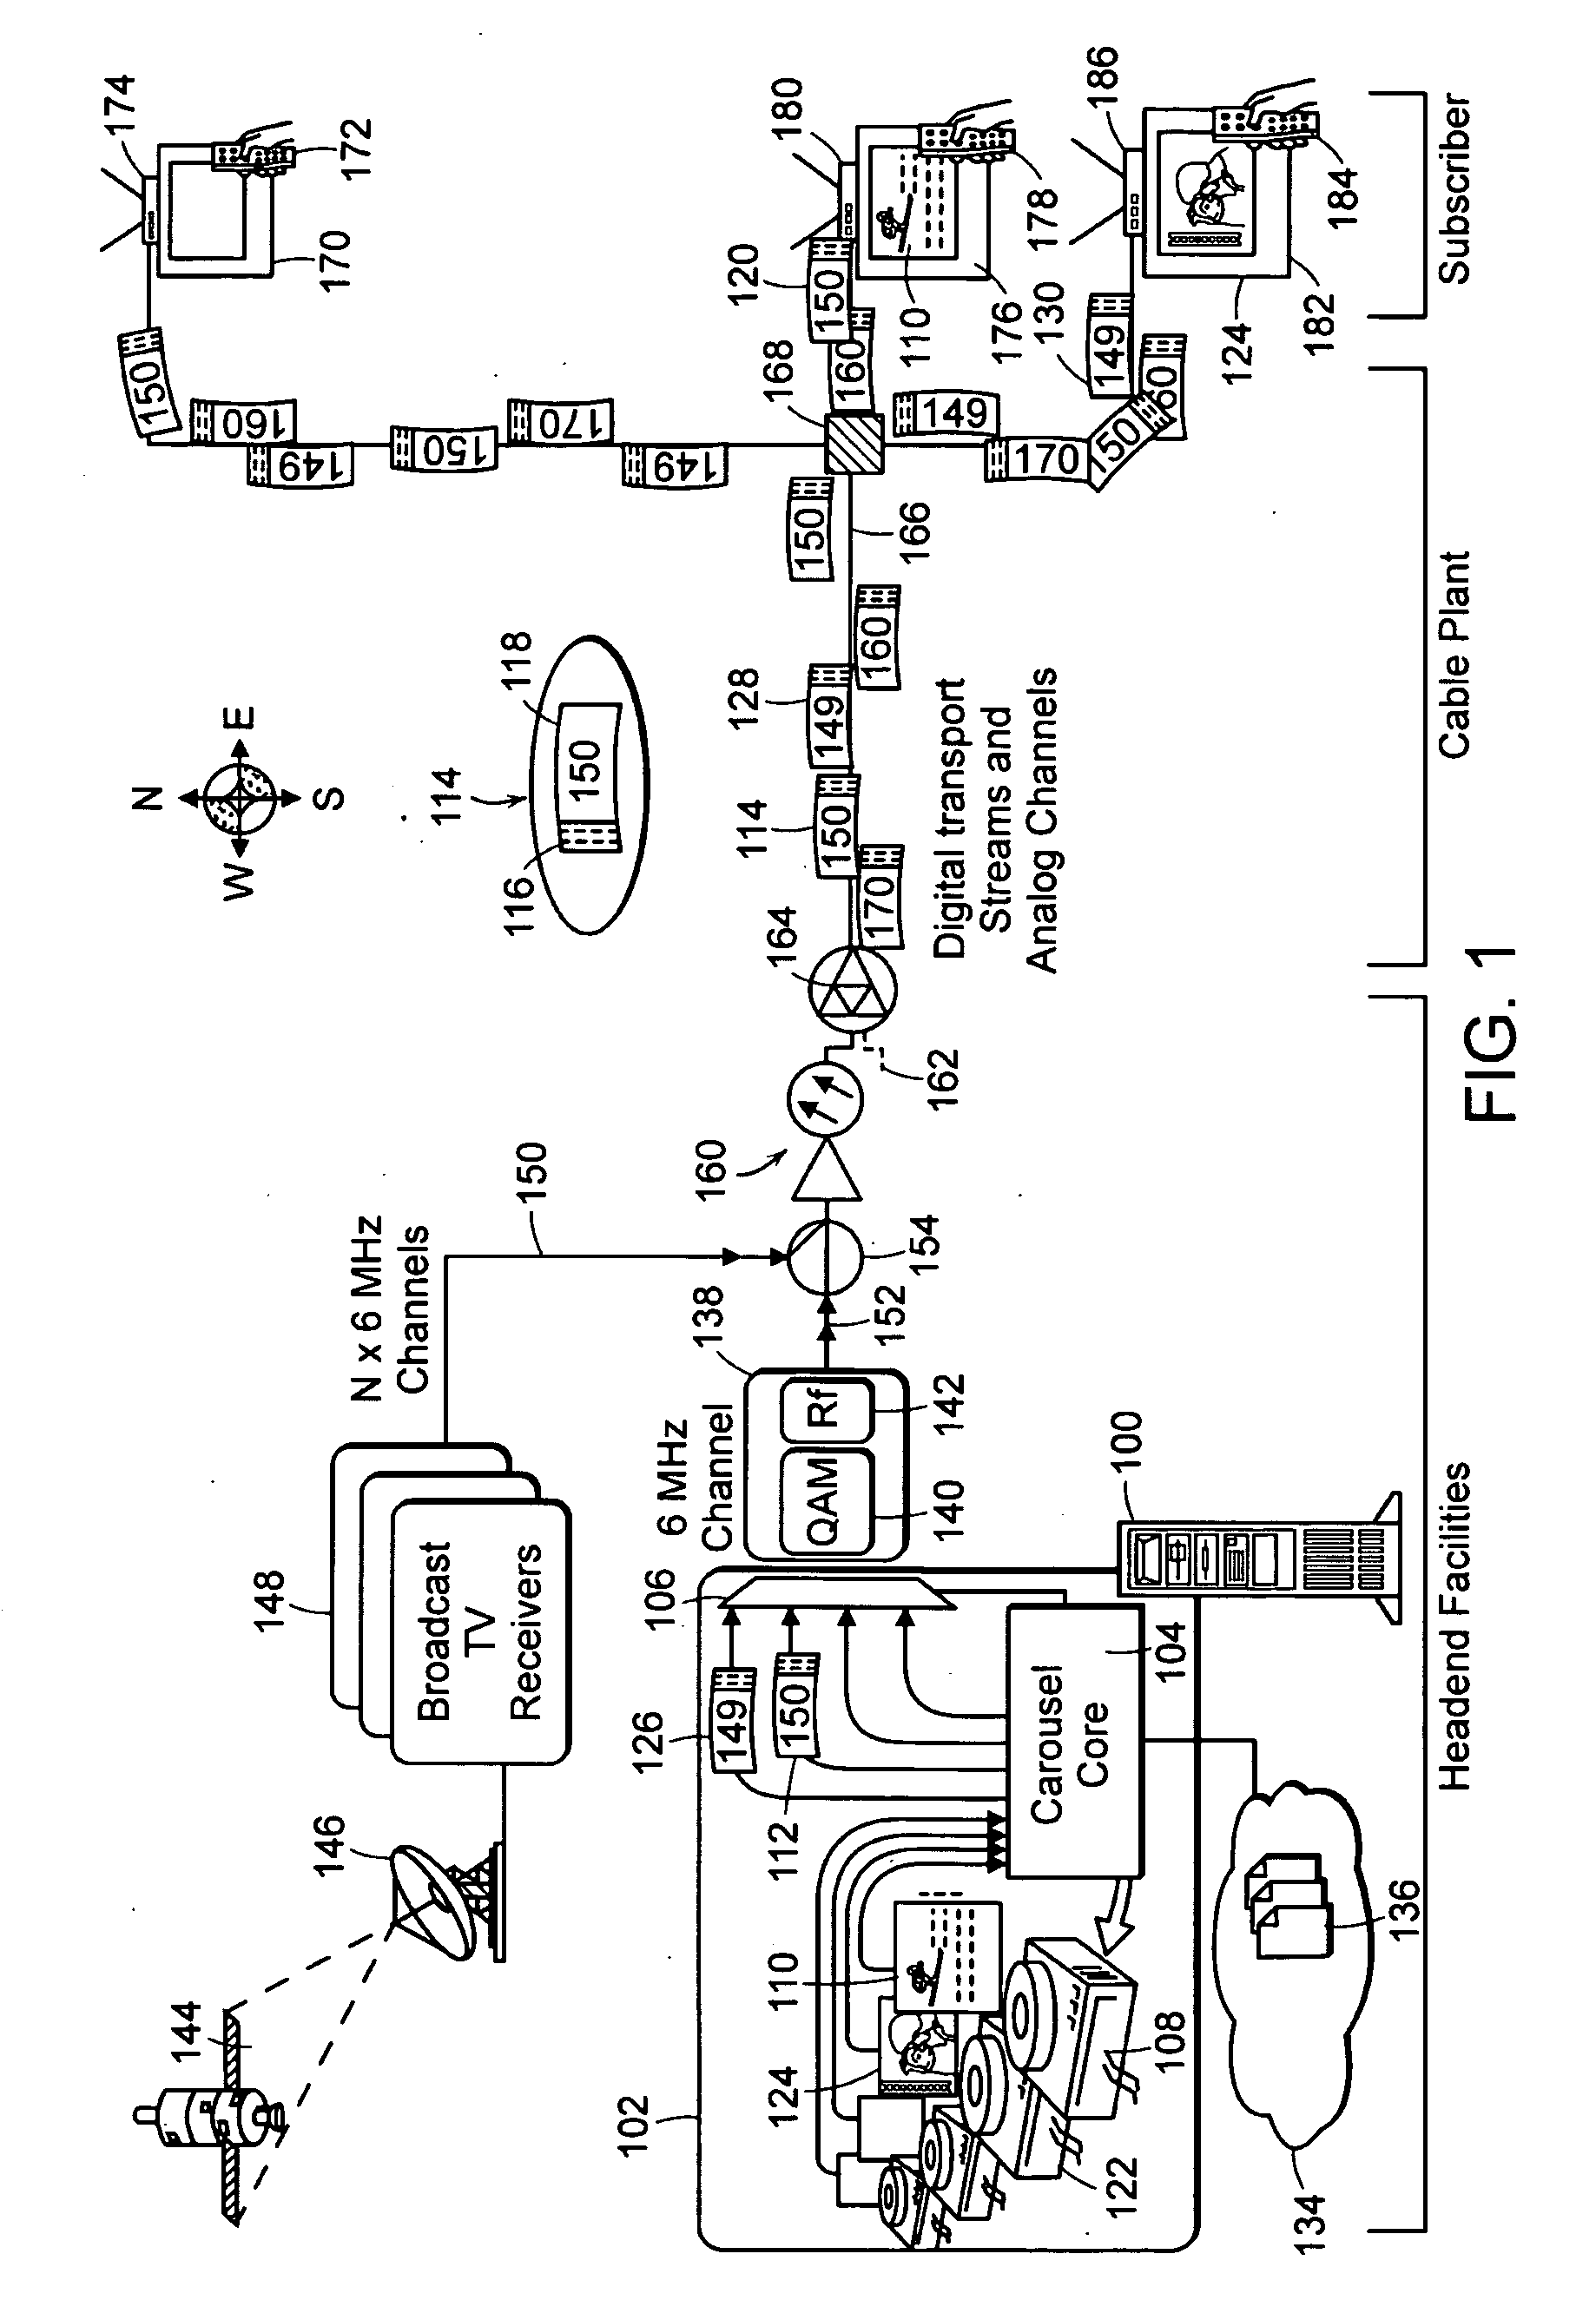 Method for Bandwidth Regulation on a Cable Television System Channel